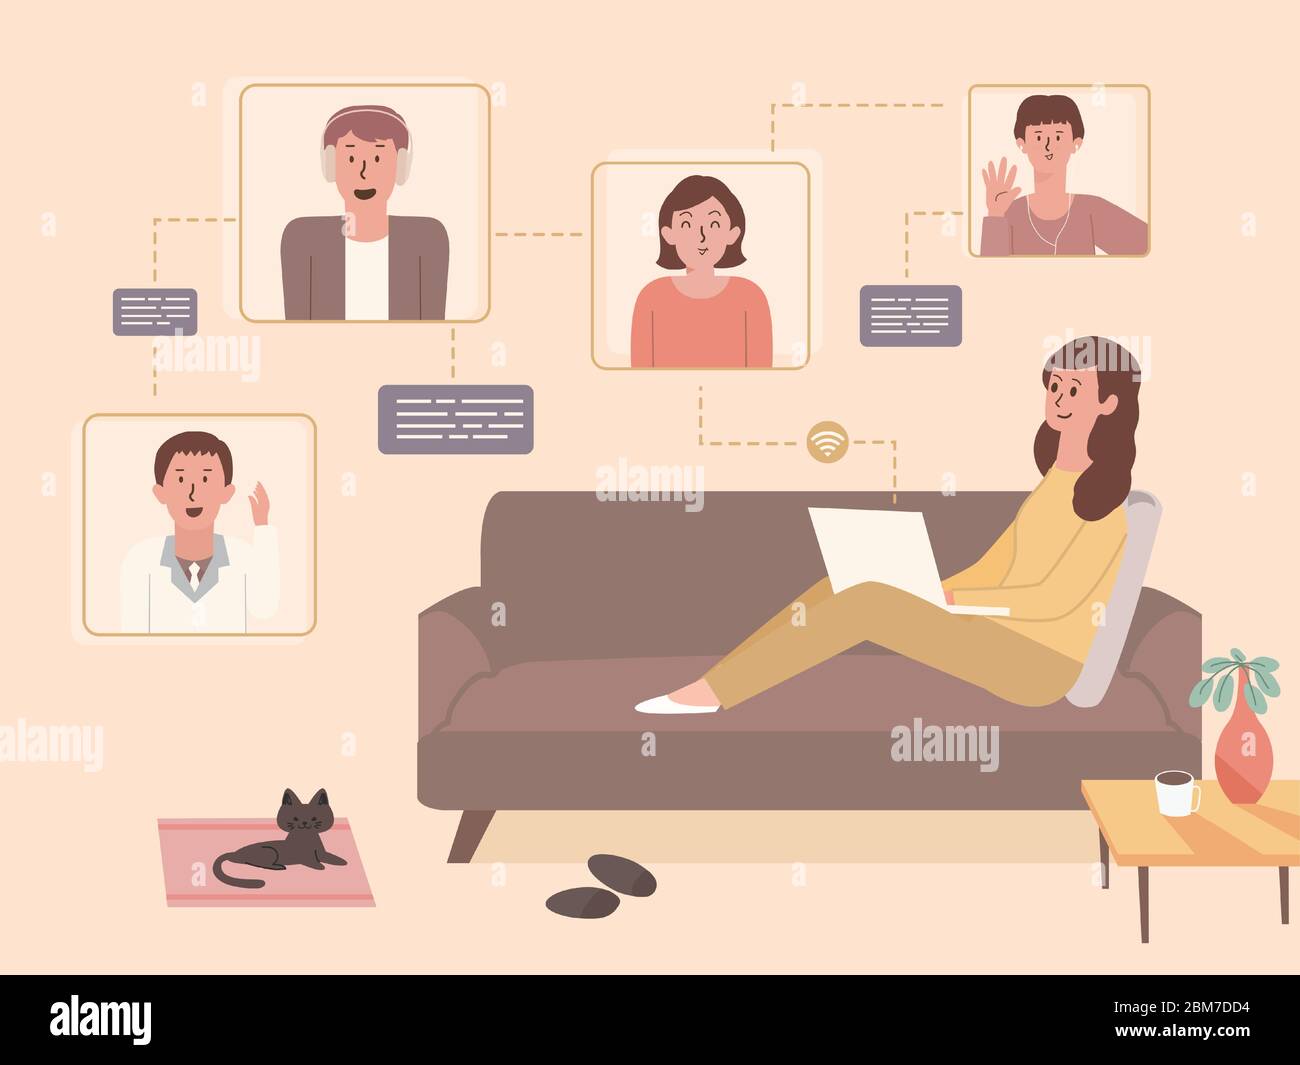 omen using a video conference with a laptop to meeting her business team from home. Illustration new normal of the world. People contract with partner Stock Vector